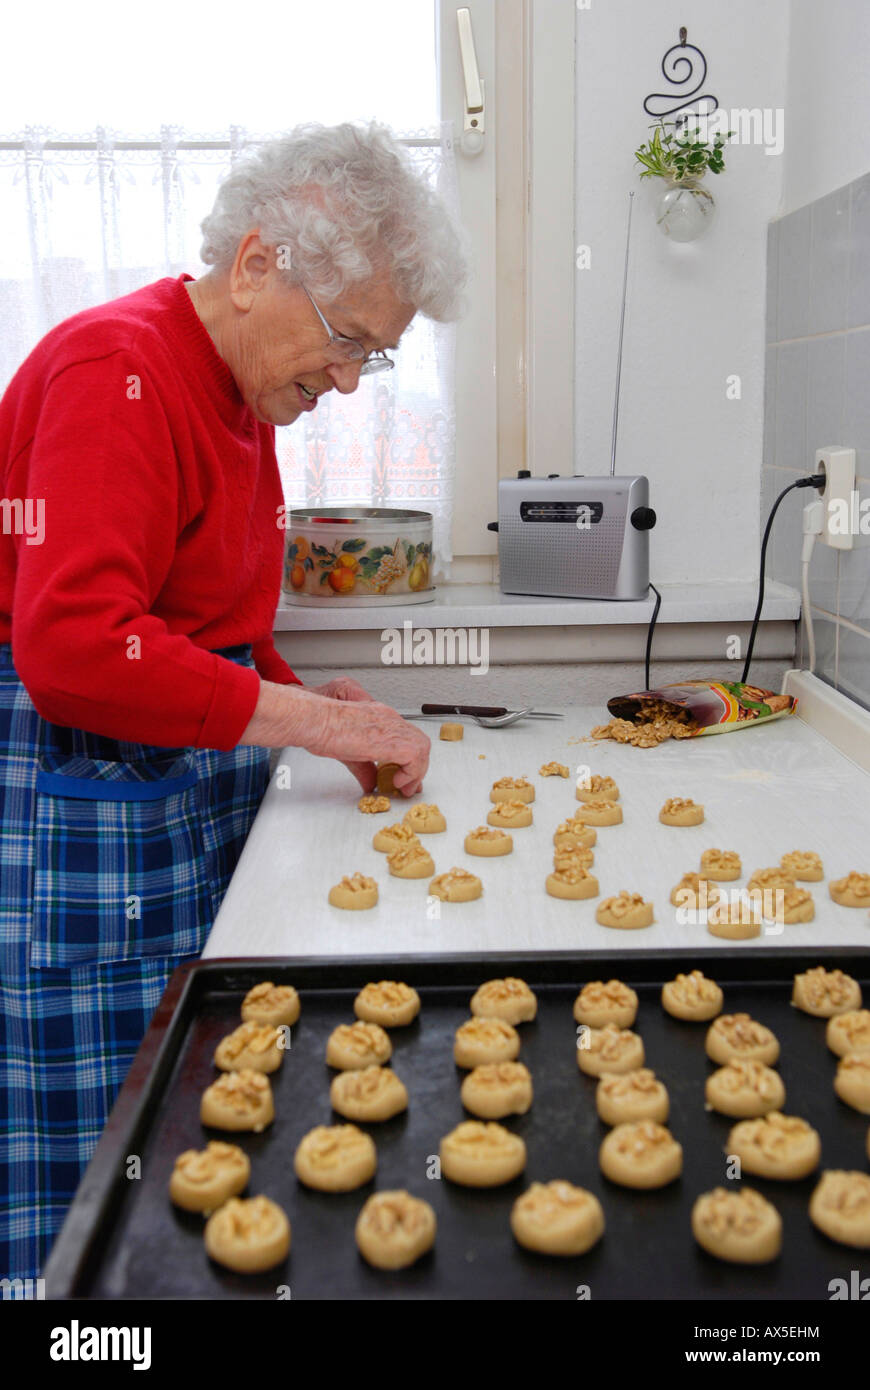 Old woman baking cookies Stock Photo